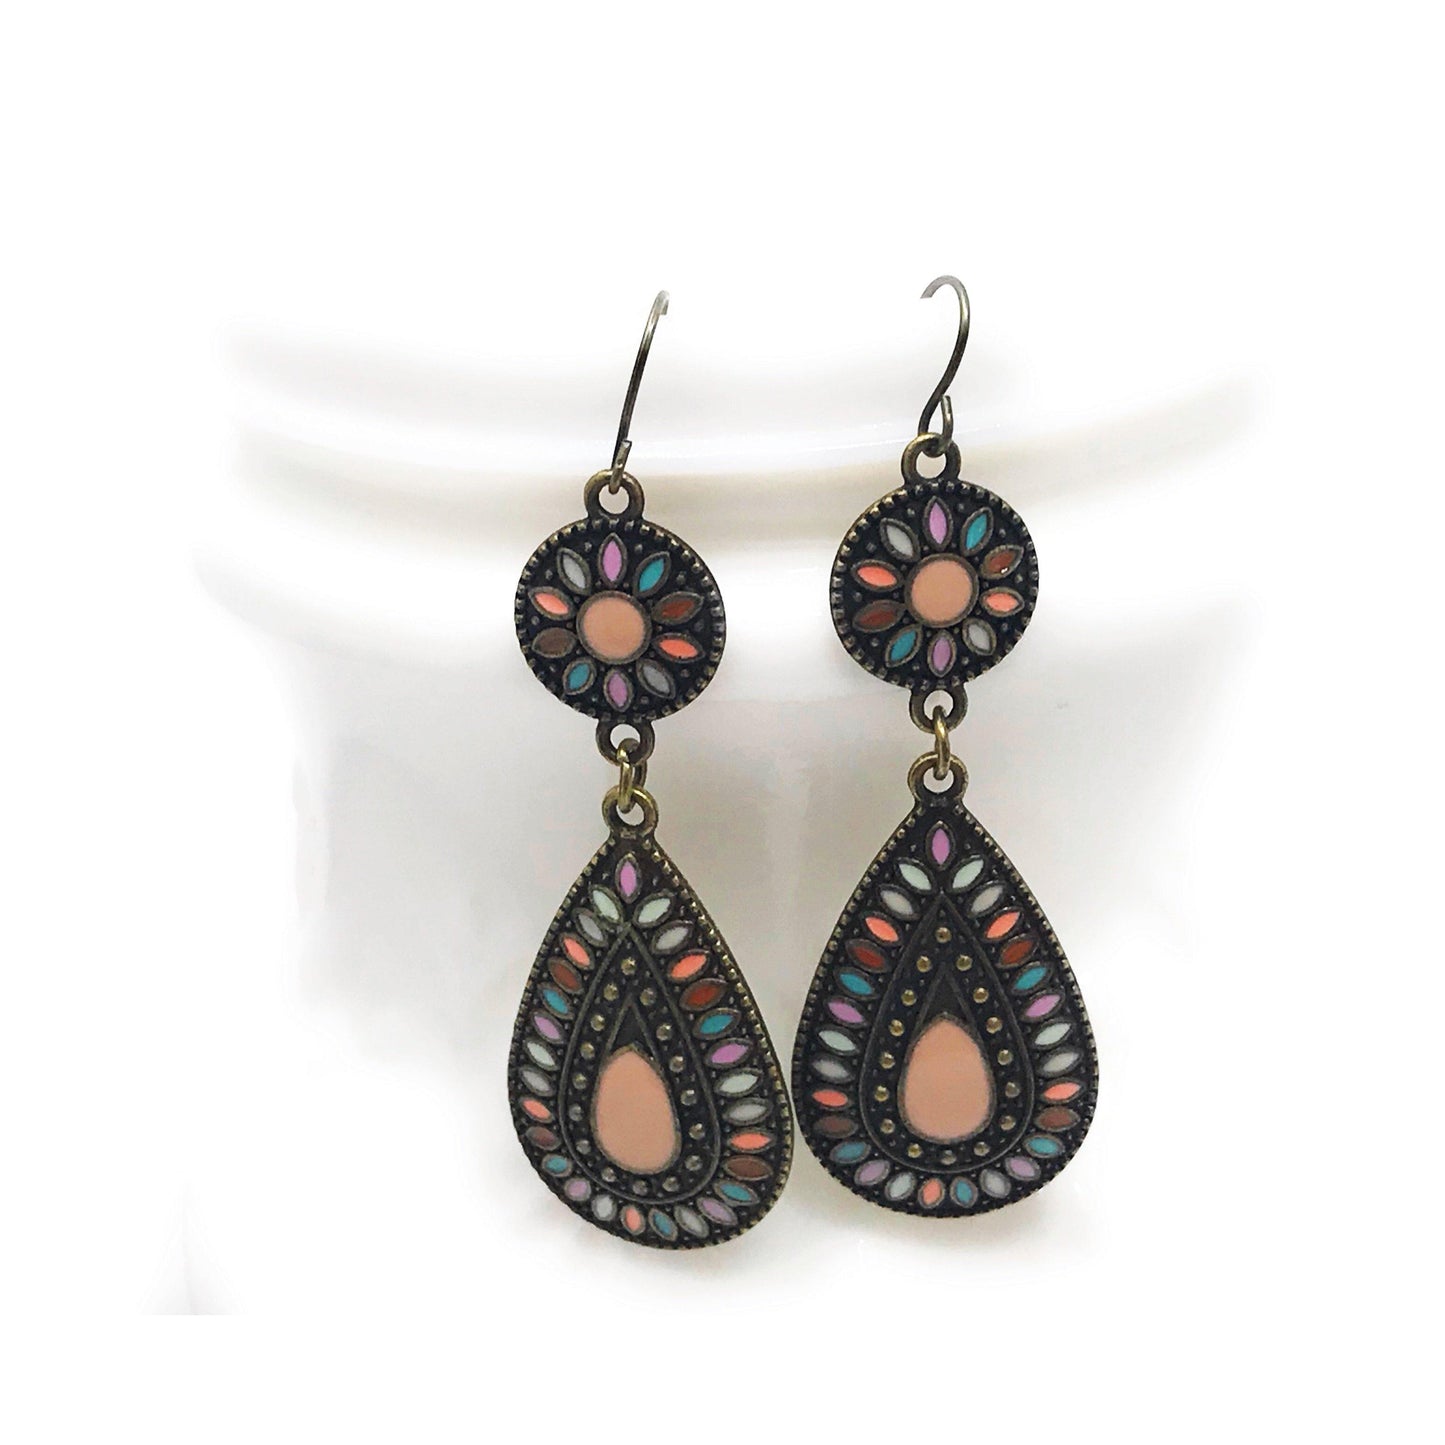 Teardrop Boho Floral Dangle Earrings: Exquisite Statement Pieces for Bohemian Chic Style